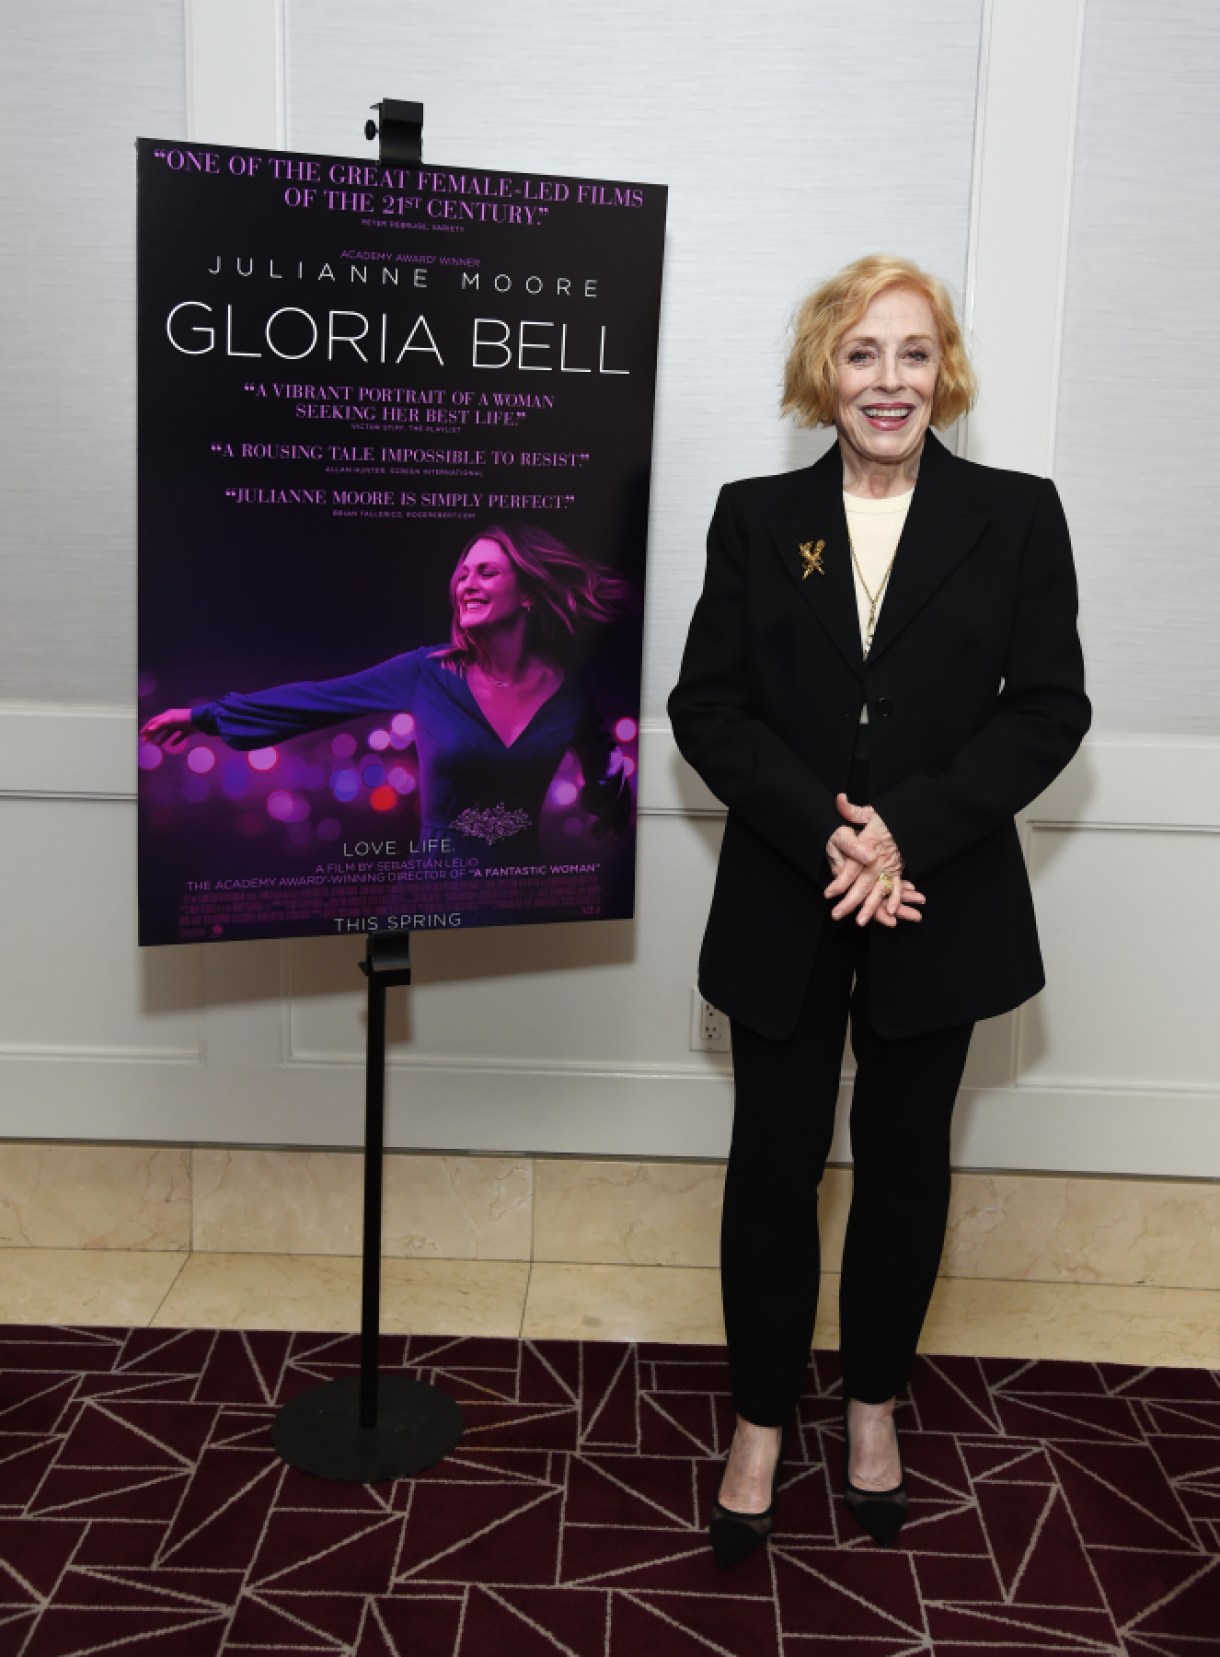 WEST HOLLYWOOD, CALIFORNIA - FEBRUARY 27: Holland Taylor attends a special screening of A24's "Gloria Bell" at The London West Hollywood on February 27, 2019 in West Hollywood, California. (Photo by Amanda Edwards/Getty Images)